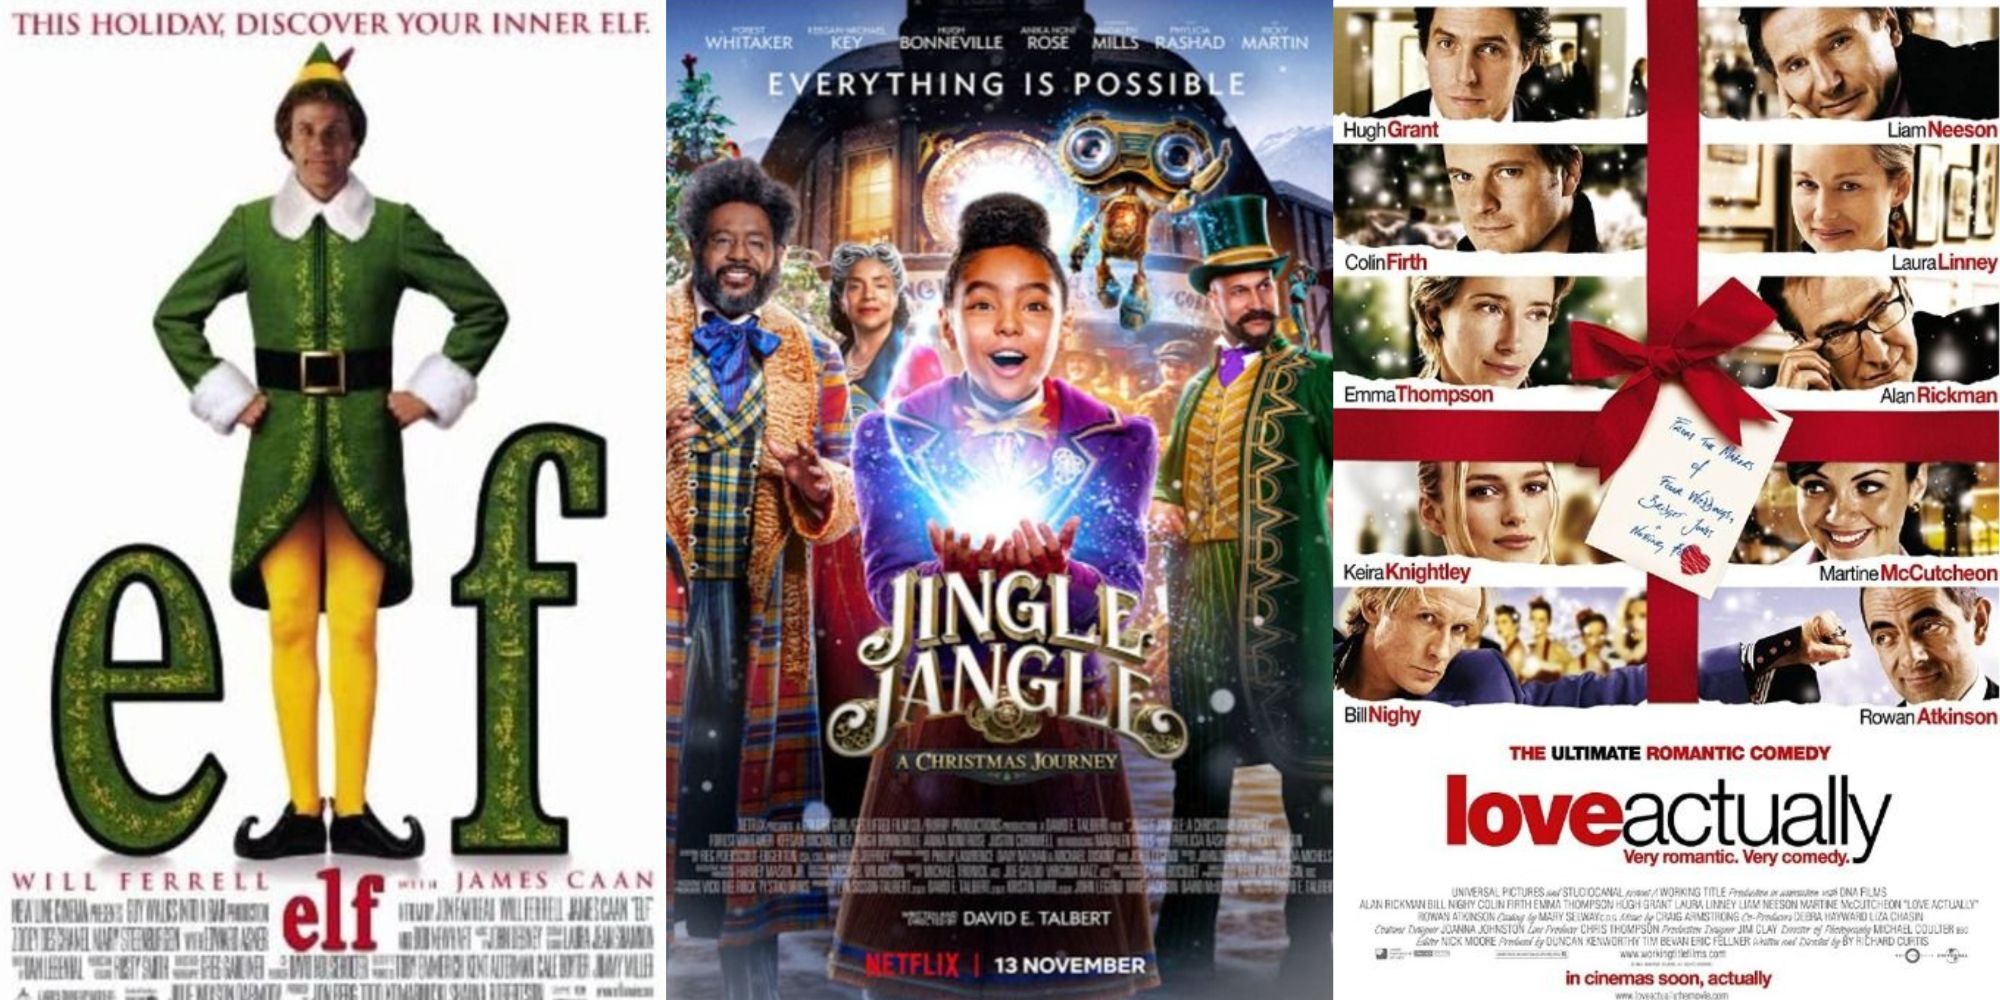 Split image of the posters for Elf, Jingle Jangle, and Love Actually